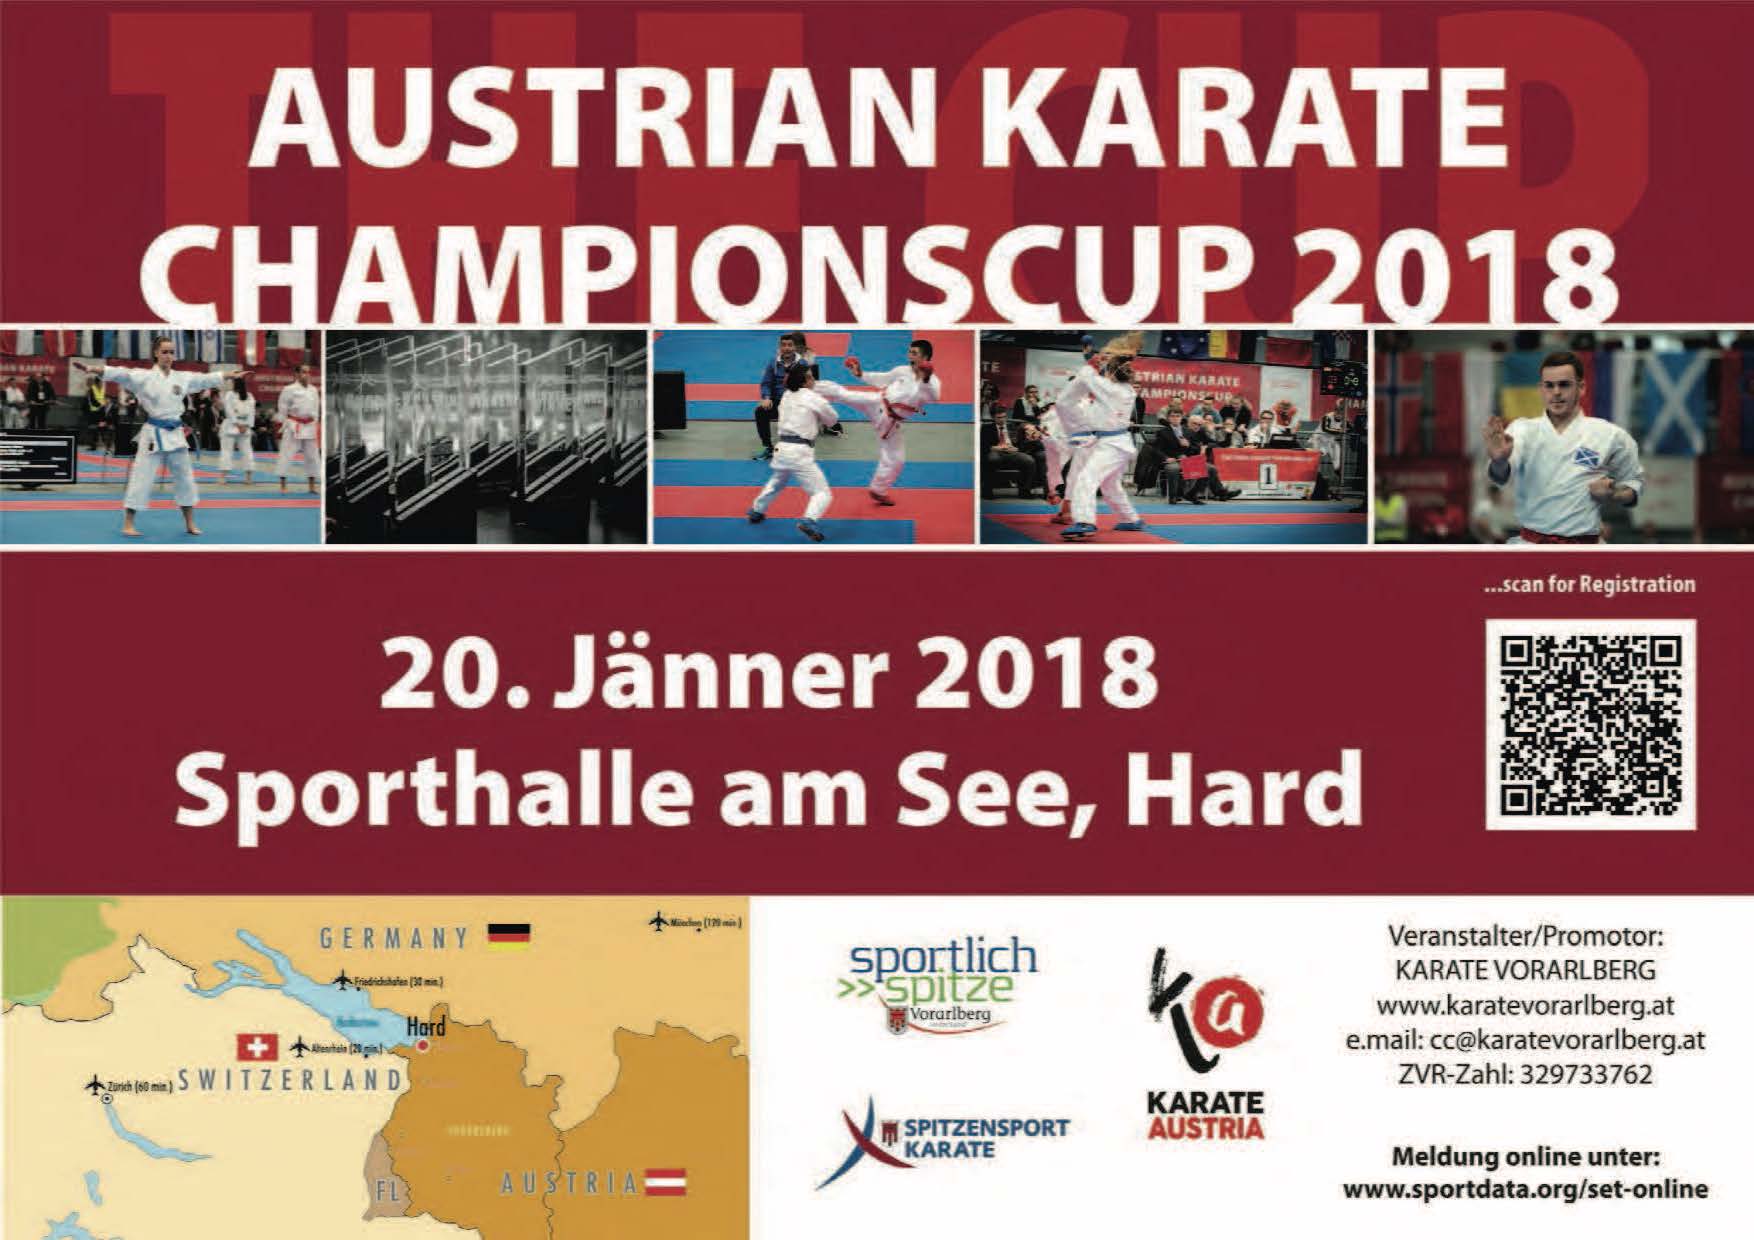 images/karate/CHAMPIONSCUP_2018.jpg